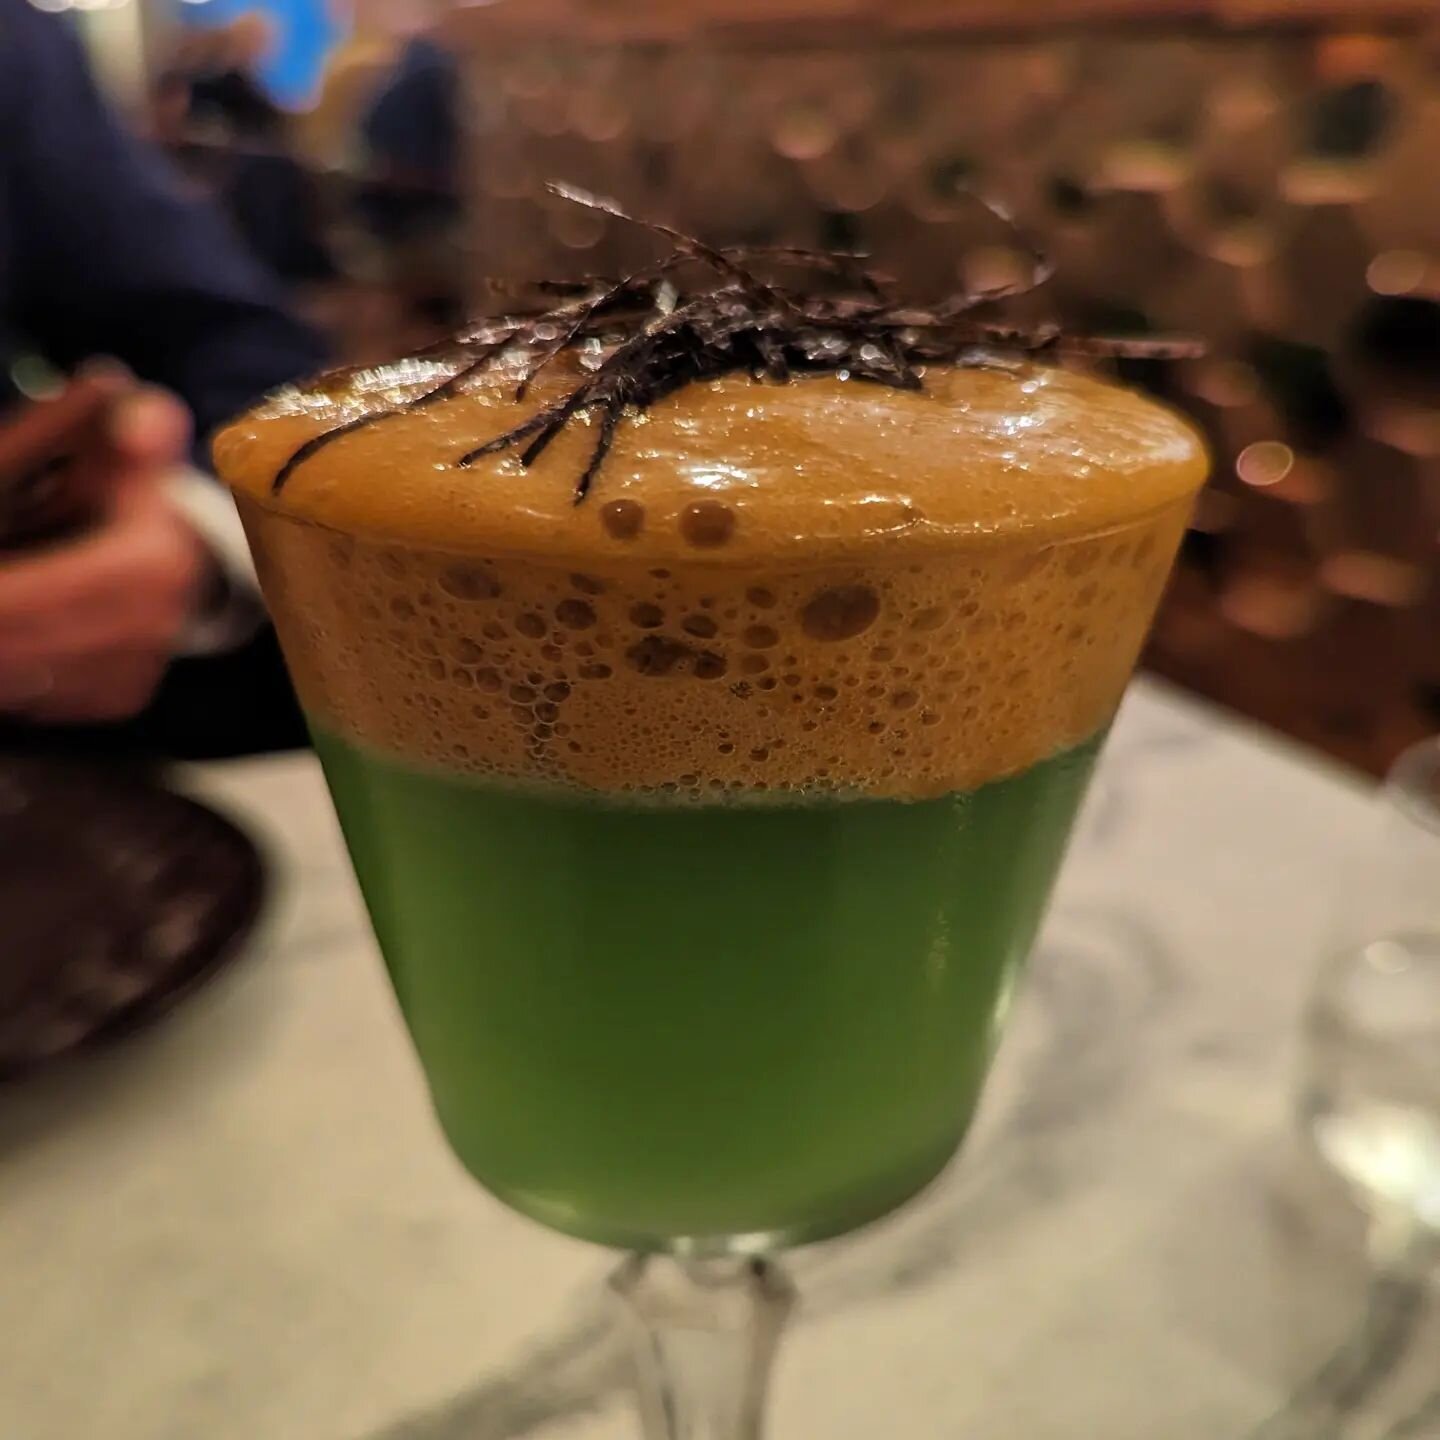 Sea Foam or more like a Lobster Bisque foam with Seaweed on top.  Cocktail with Tequila, Lime Cayenne and Cardamom . Perfect with Shrimp #cocktails #tasco #porto